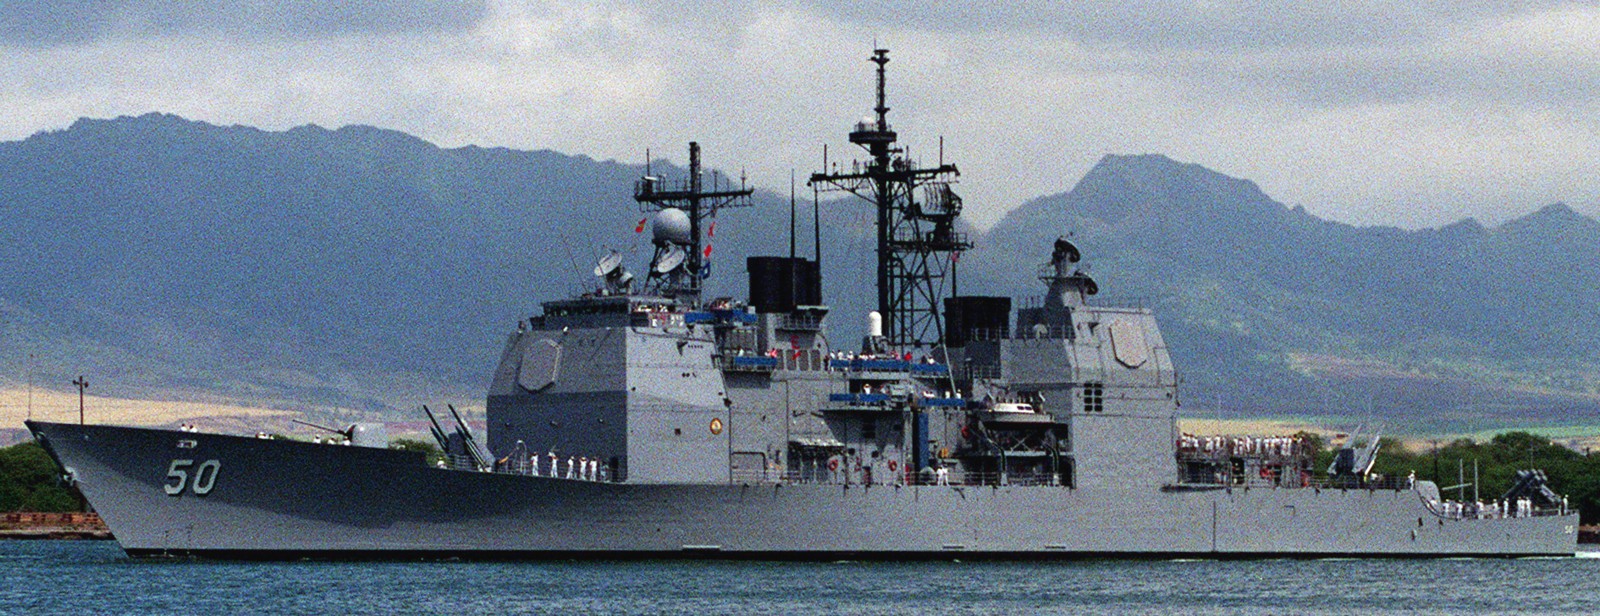 cg-50 uss valley forge ticonderoga class guided missile cruiser aegis us navy pearl harbor 48